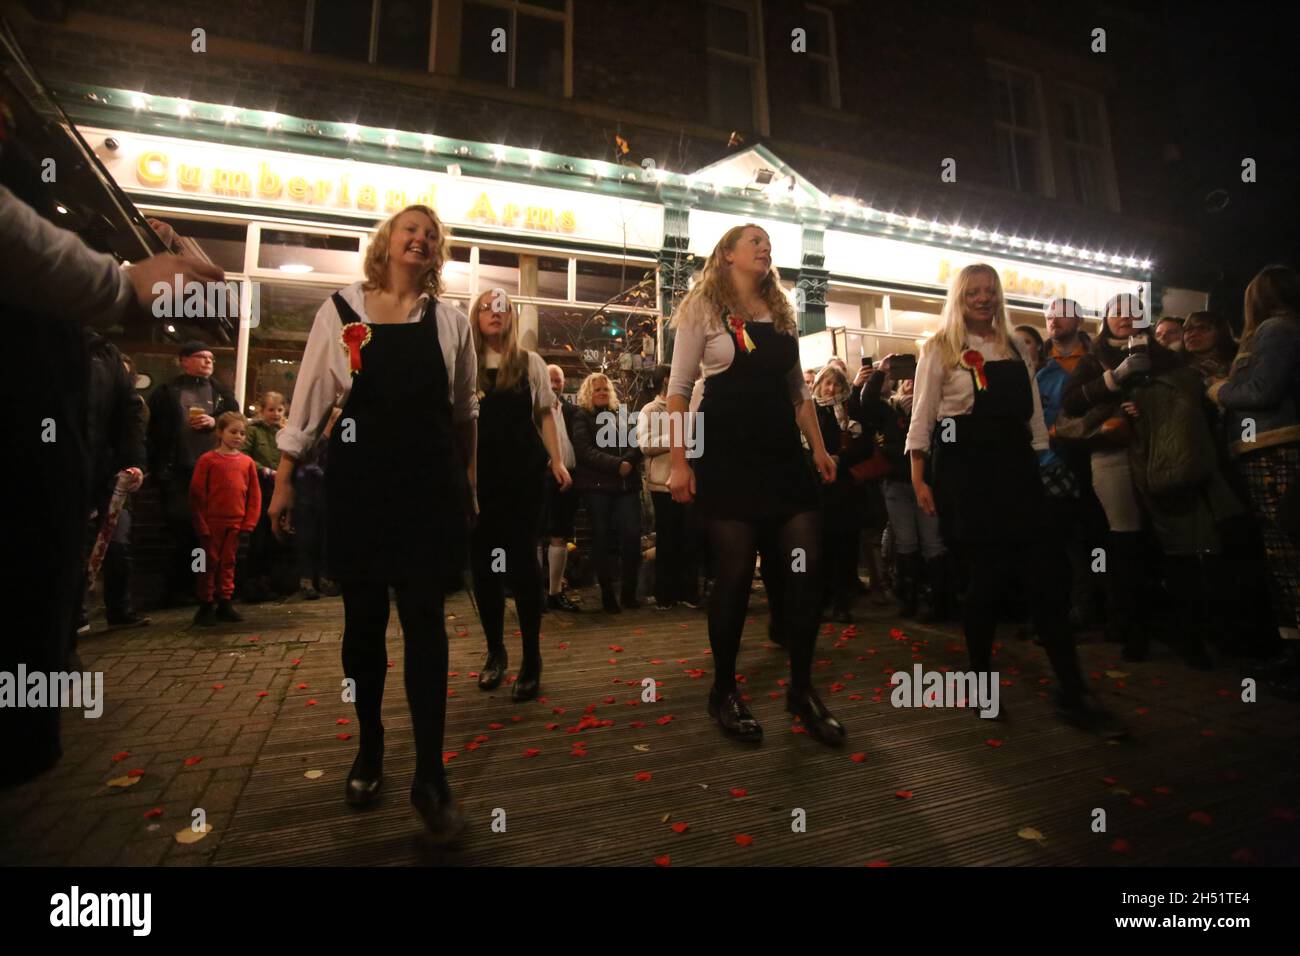 Newcastle upon Tyne, UK, 5th November 2021, Kingsman fire dance, a traditional folk celebration on Guy Fawkes night at the Cumberland Arms Pub, Credit: DEW/AlamyLive Stock Photo